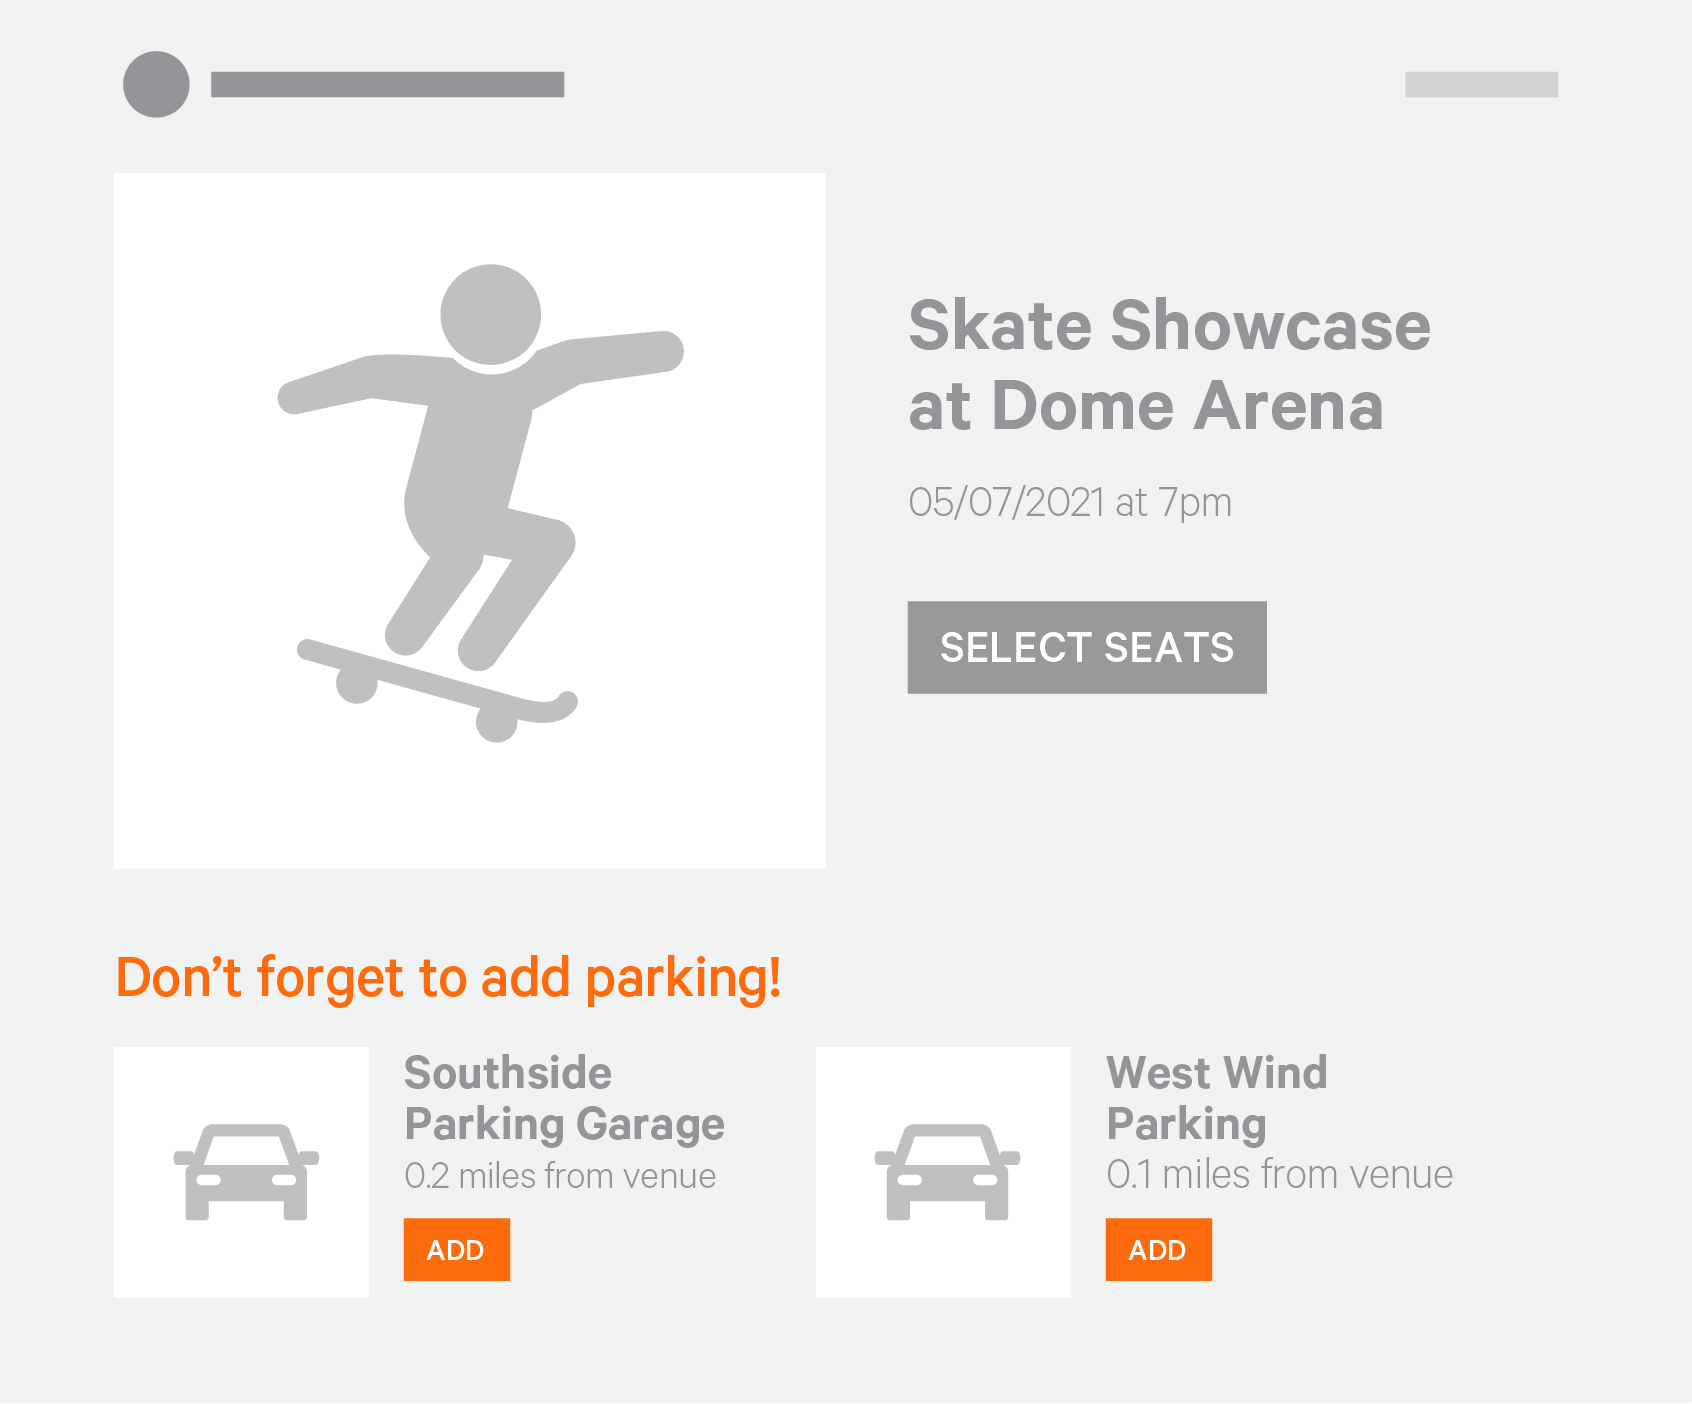 Illustration of an event details page that includes a solicitation to add parking access to the event ticket